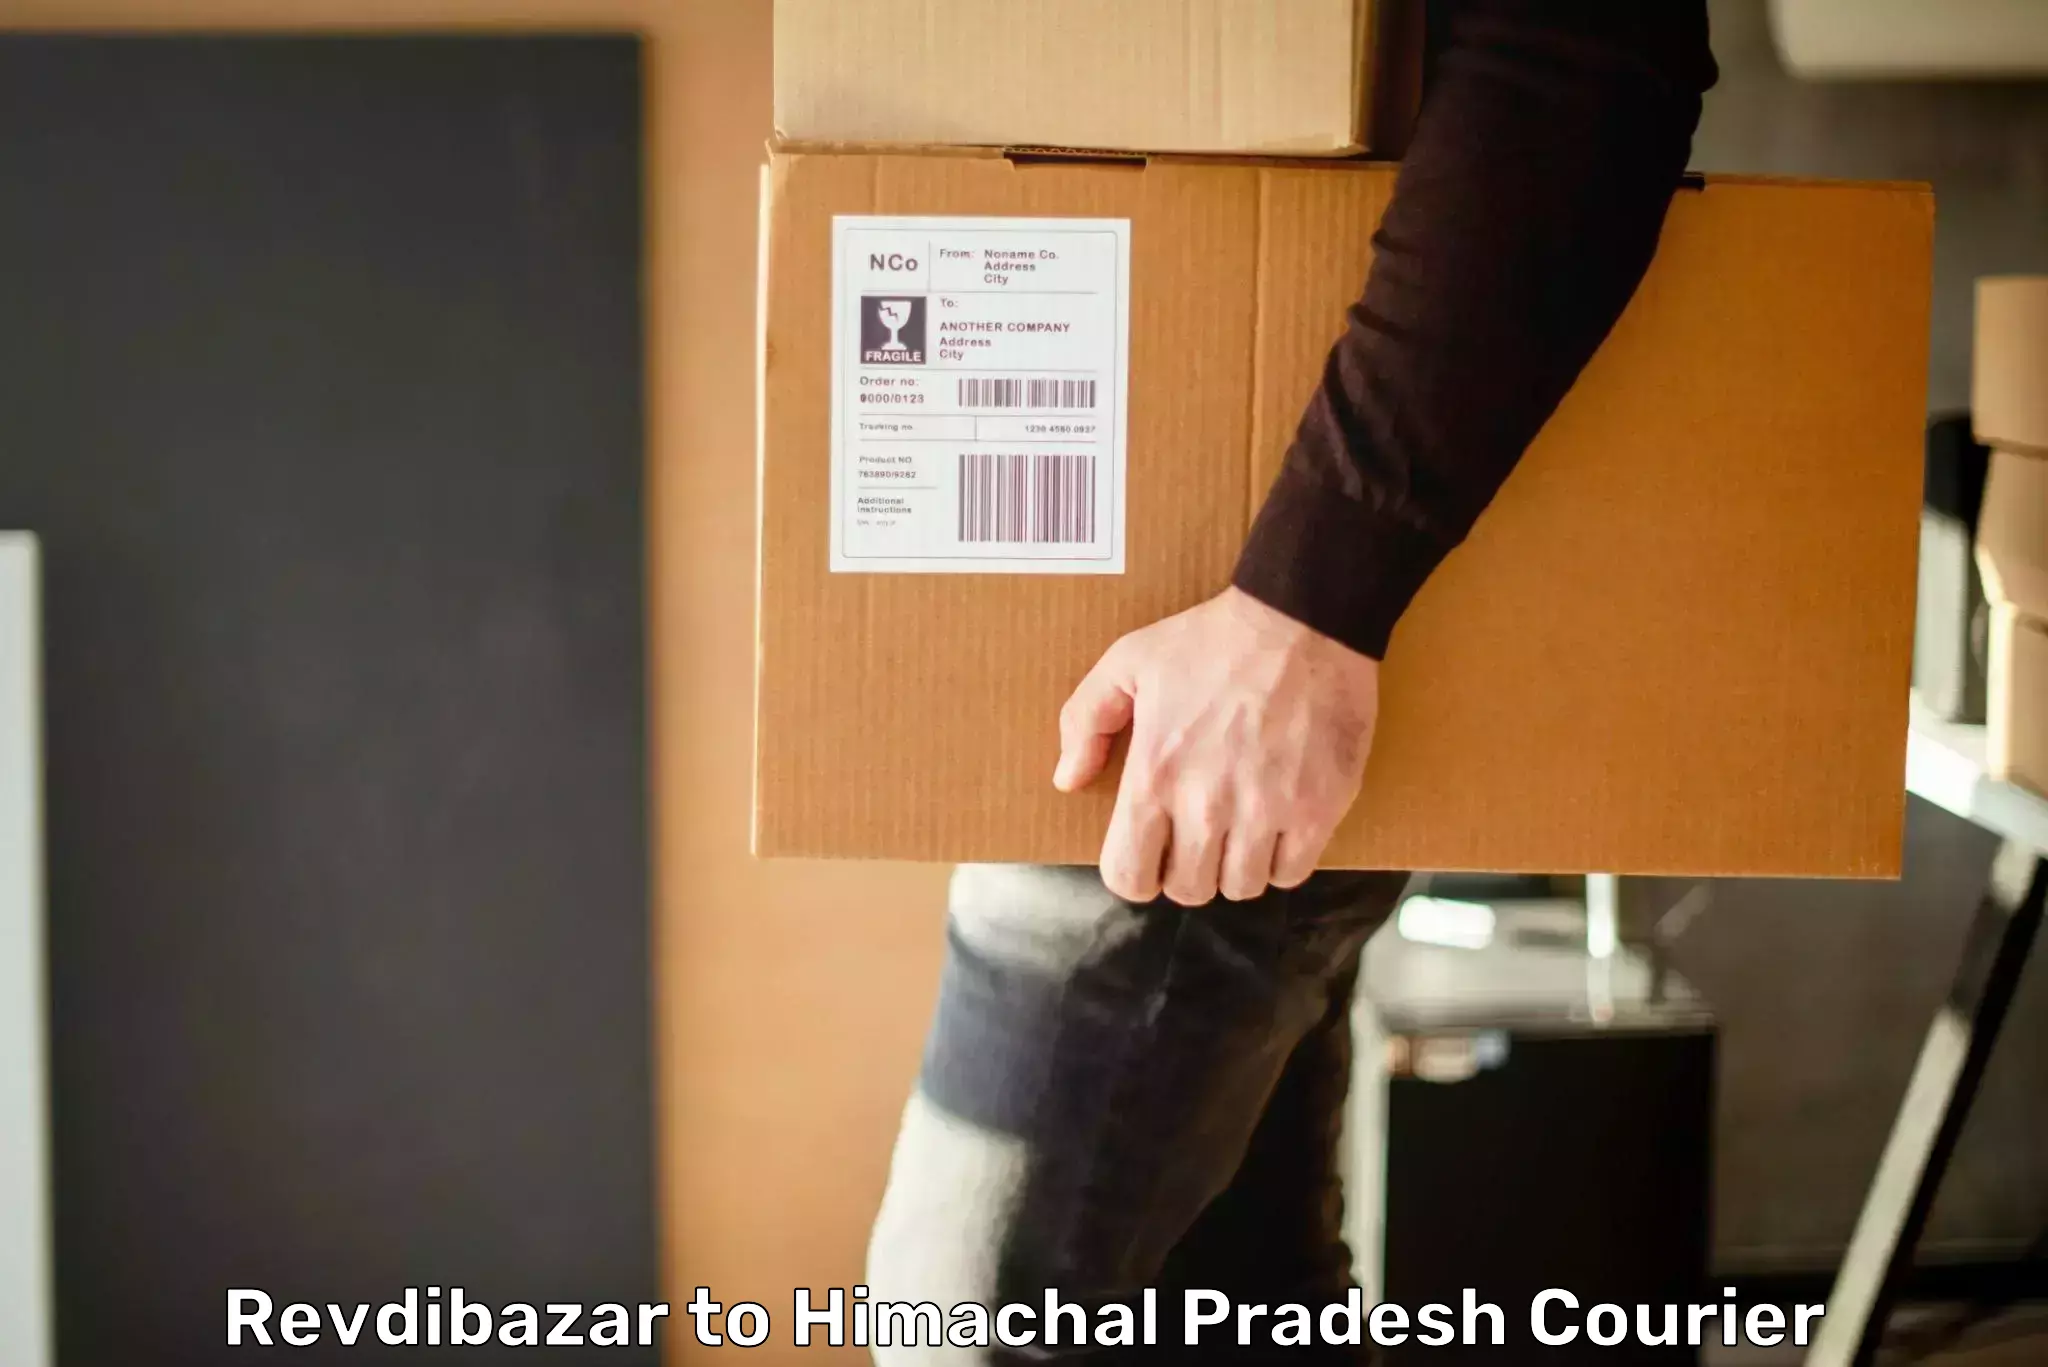 Quality courier partnerships Revdibazar to Dheera